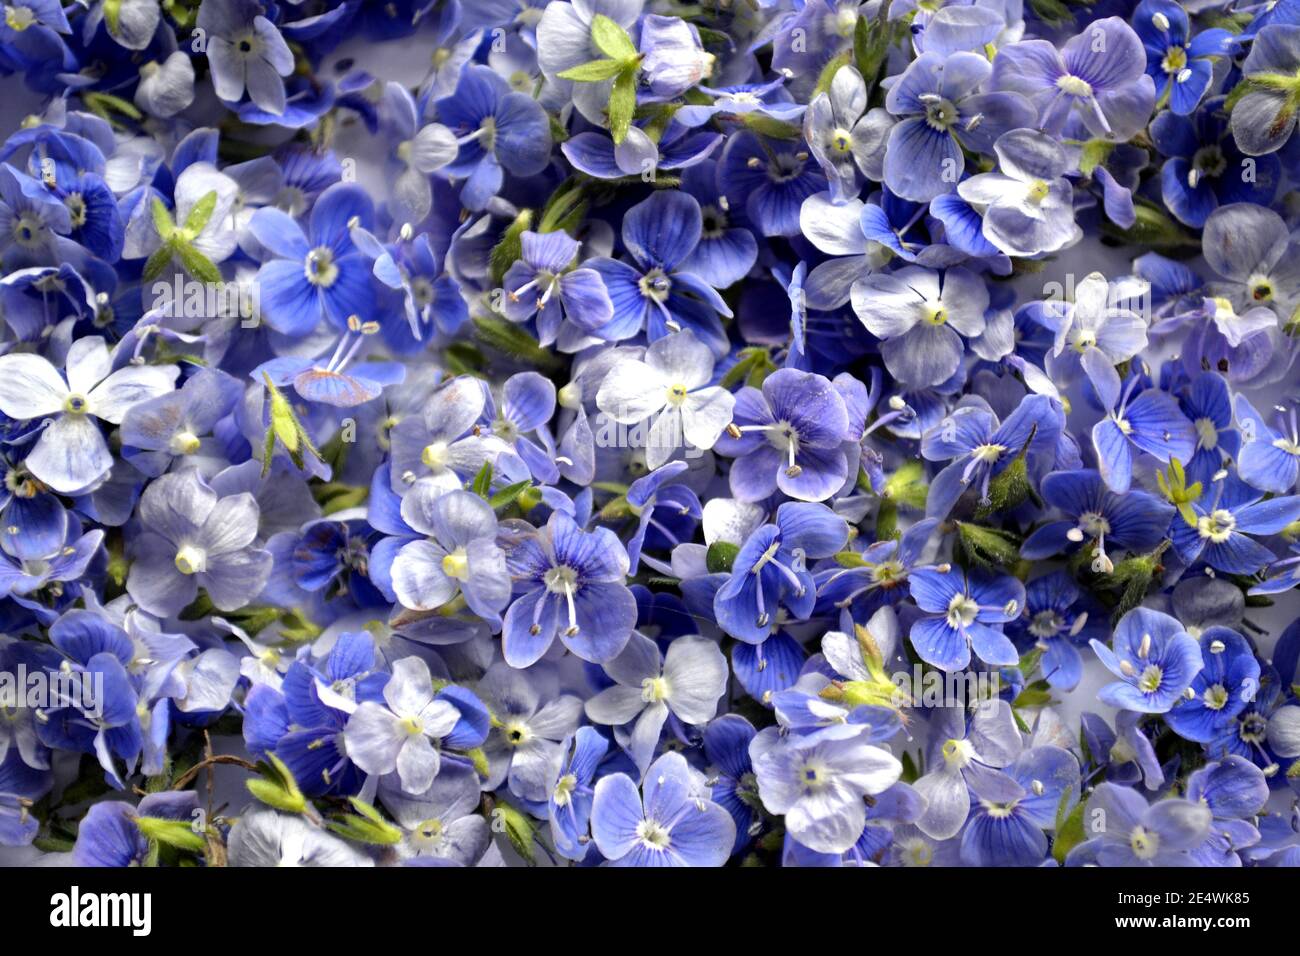 Pile of Blue Germander speedwell also known as Veronica chamaedrys or bird's eye speedwell or cat's eye Stock Photo